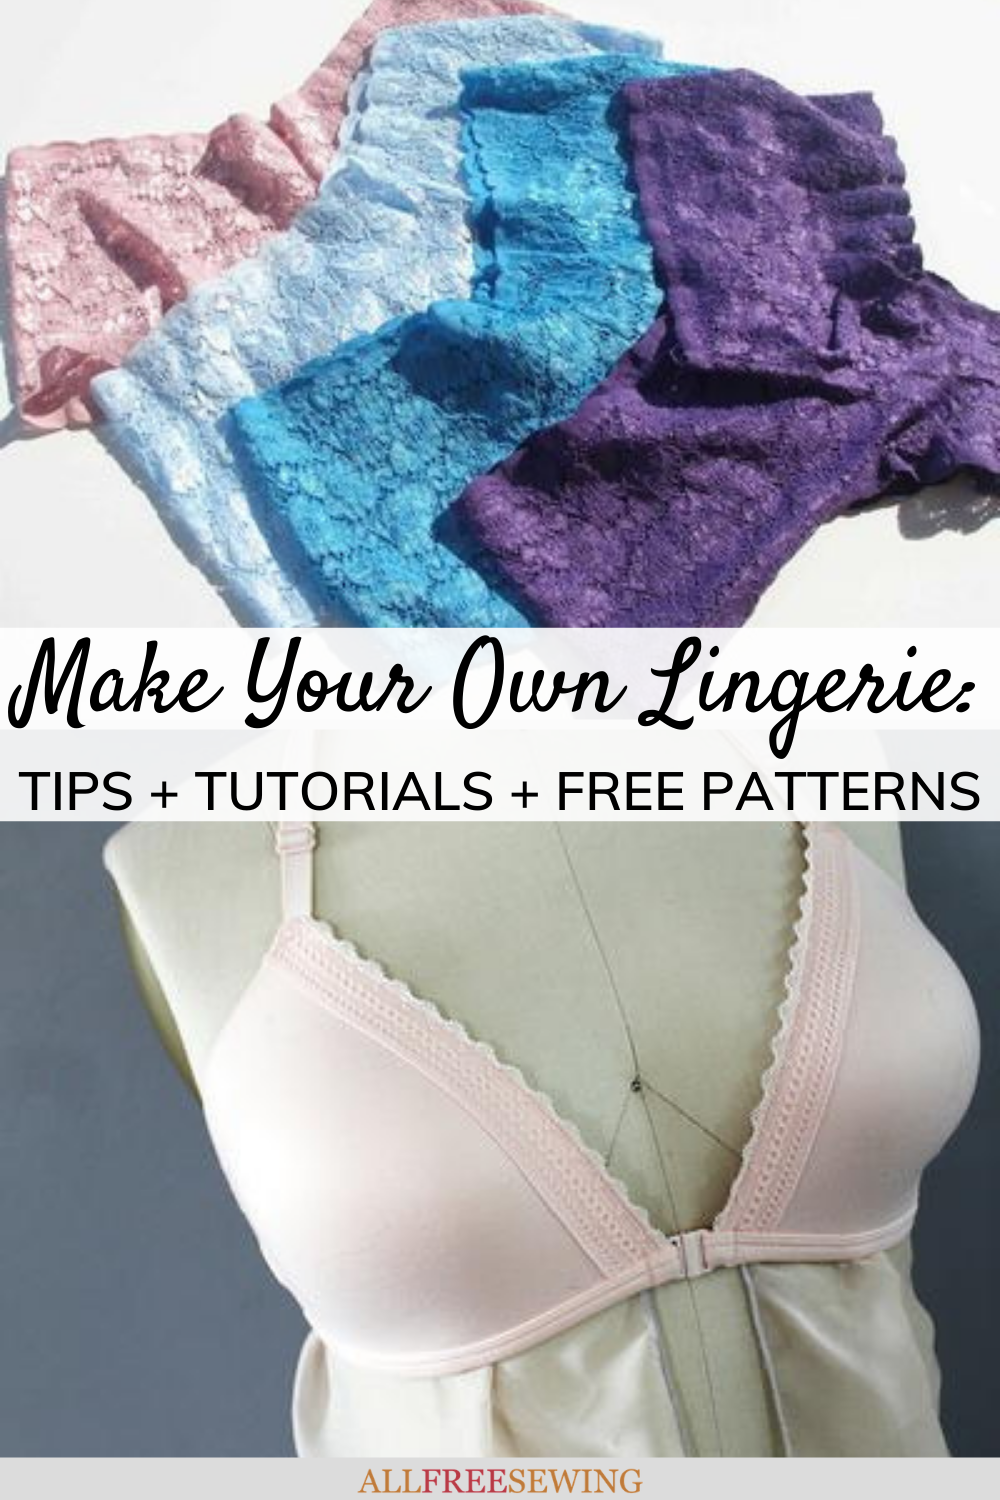 Lingerie Tips: Storage Ideas for your Lingerie and Stockings